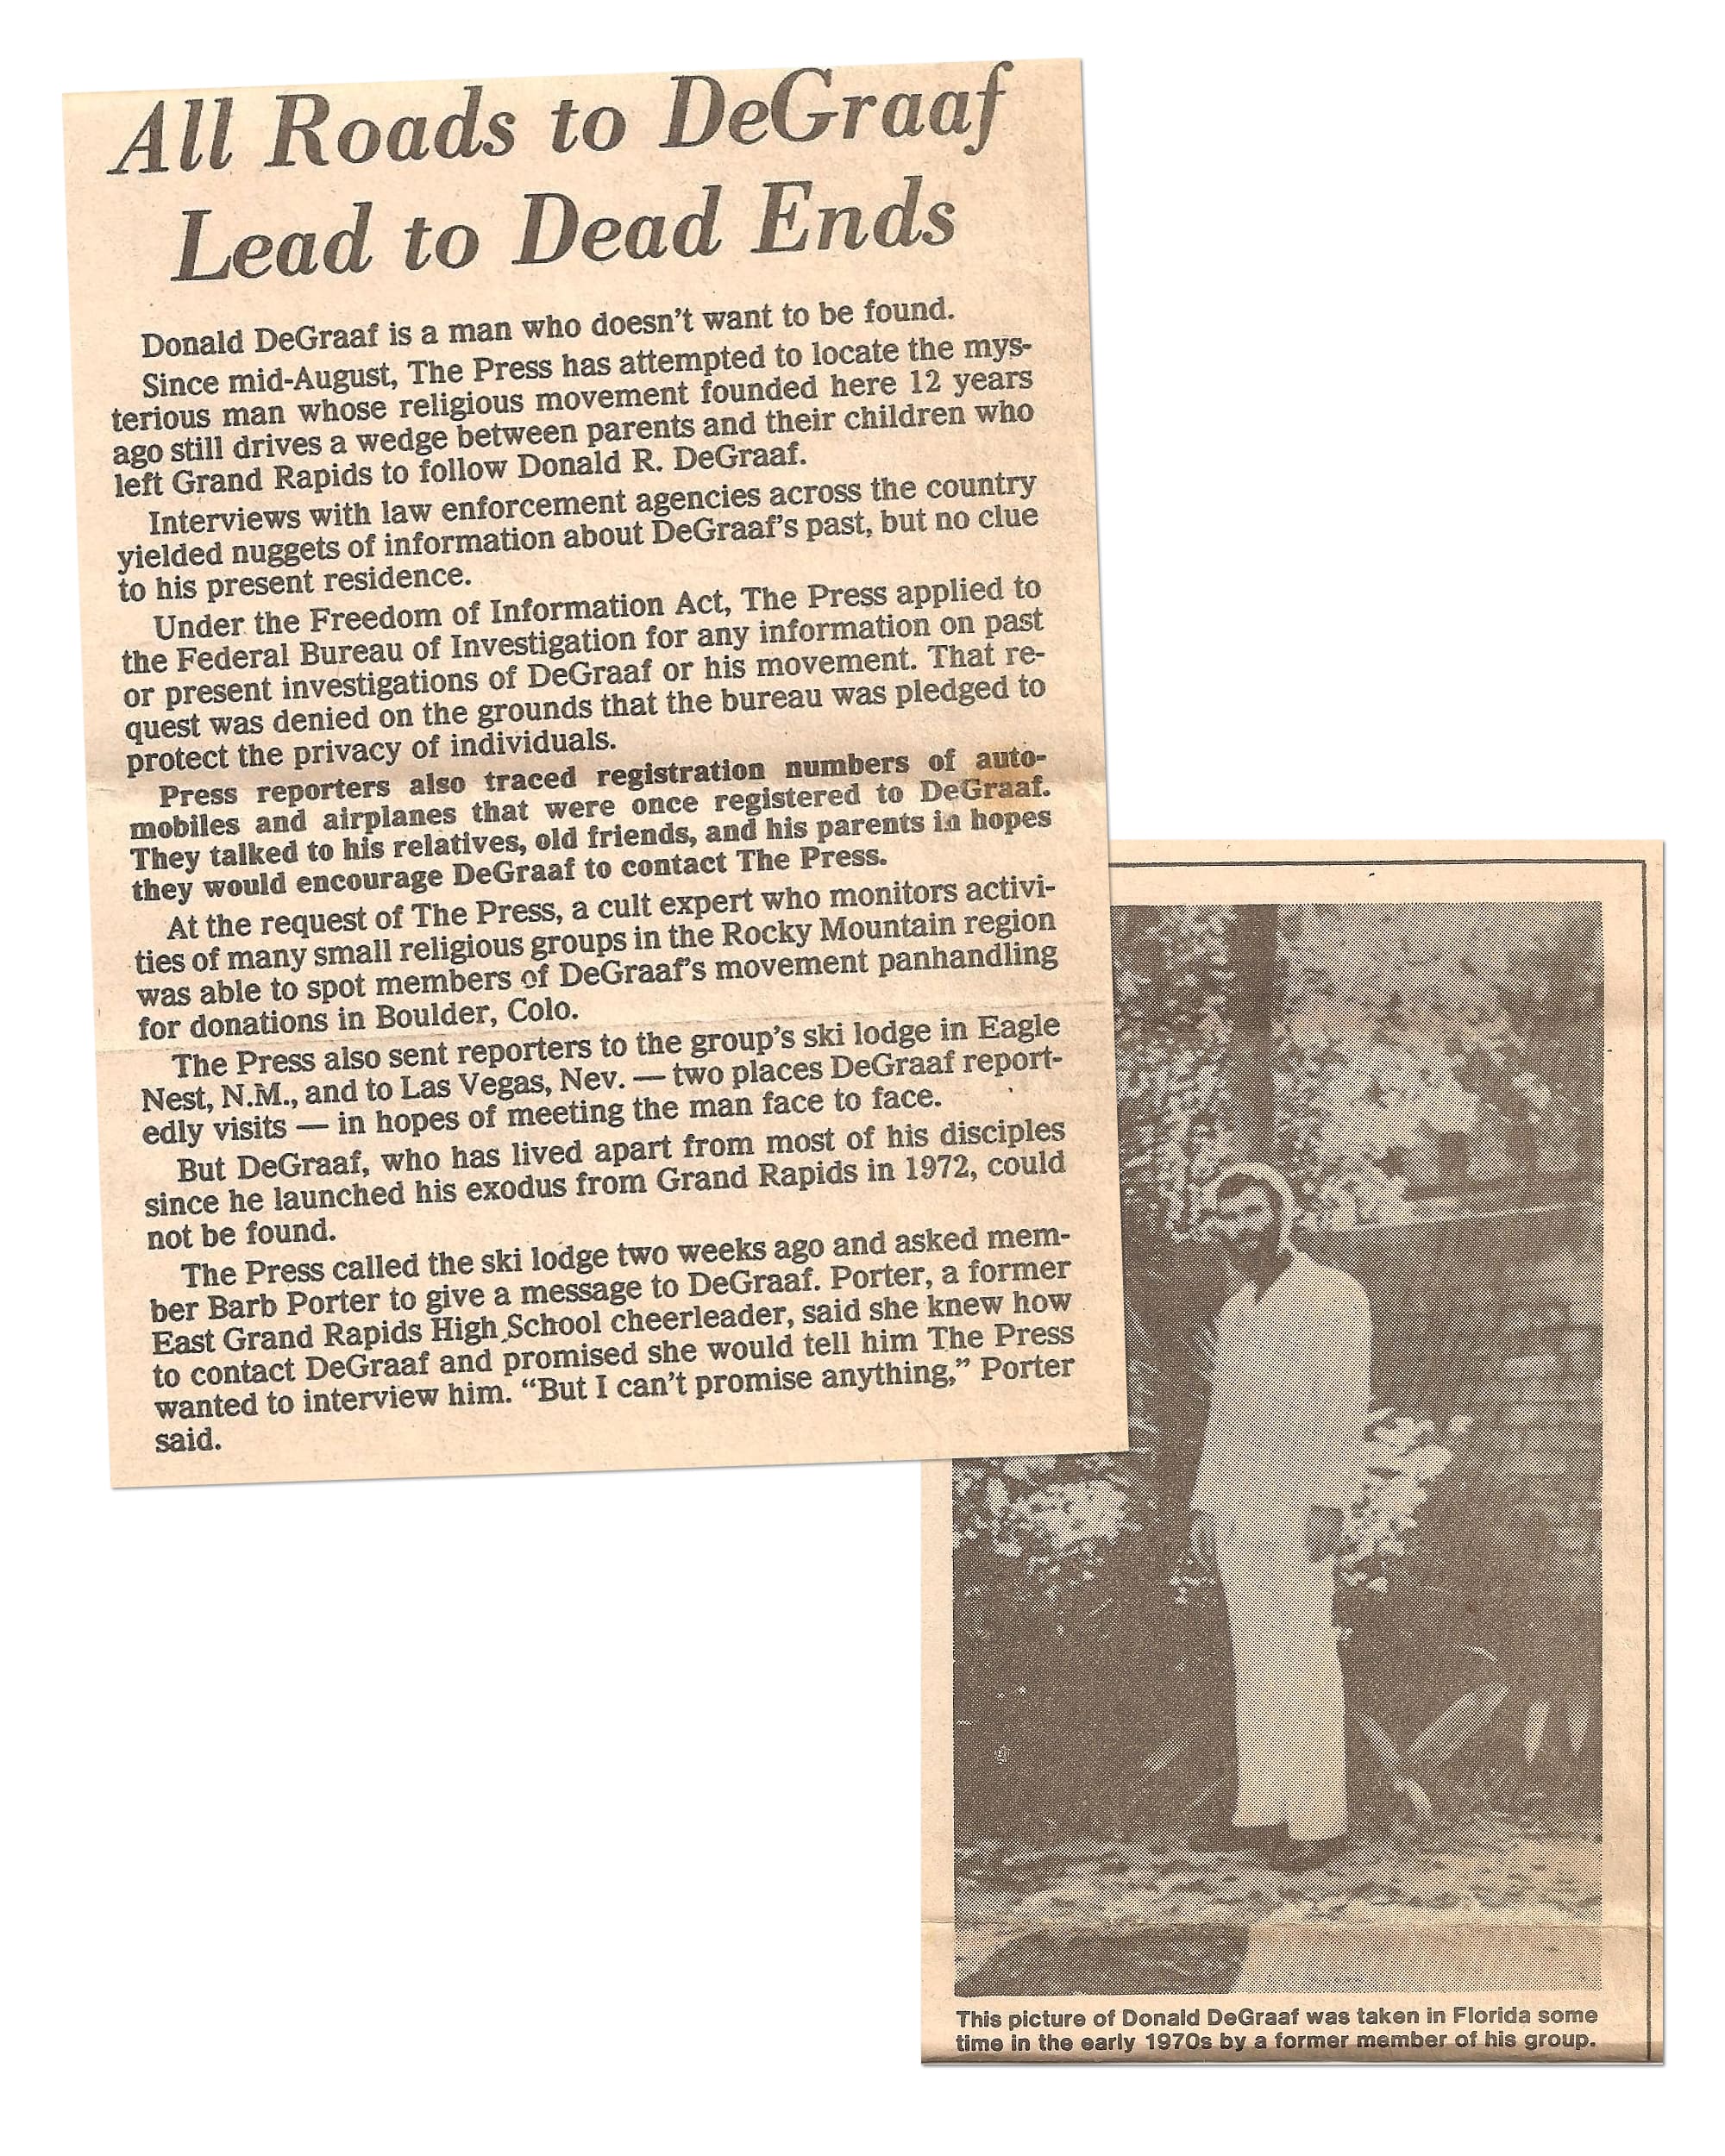 Don DeGraaf was leader of the Group, a Christian cult established in the early 70s. Bixby describes DeGraaf as “a ruffian turned Jesus.” News clippings courtesy of Dave Bixby.